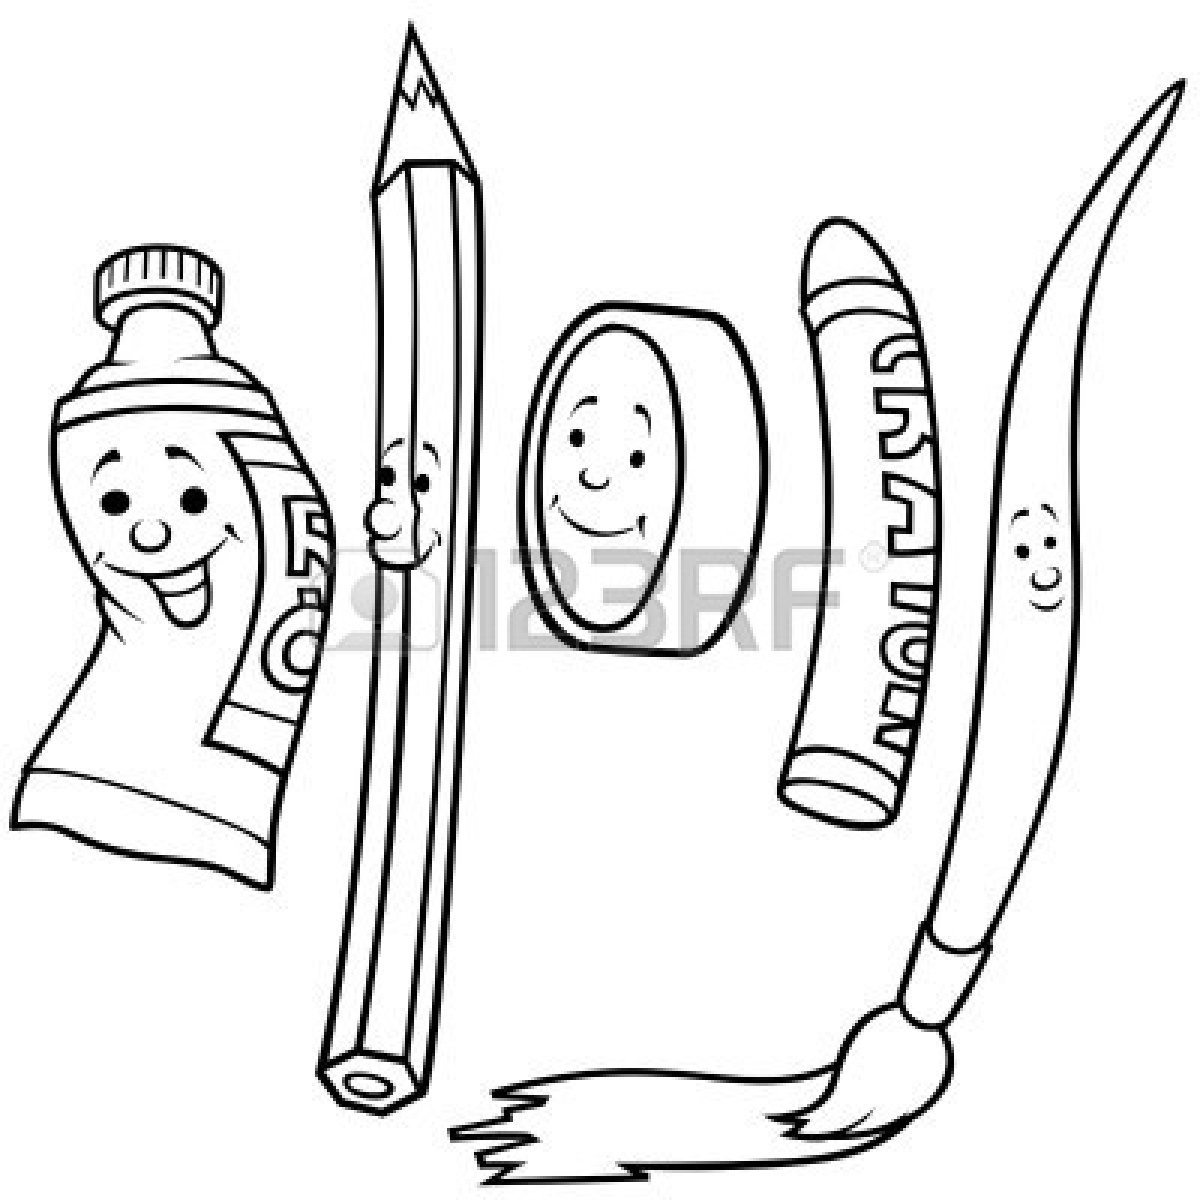 Crayon Clipart Black And White Crayon Clipart Black And White 8756122    